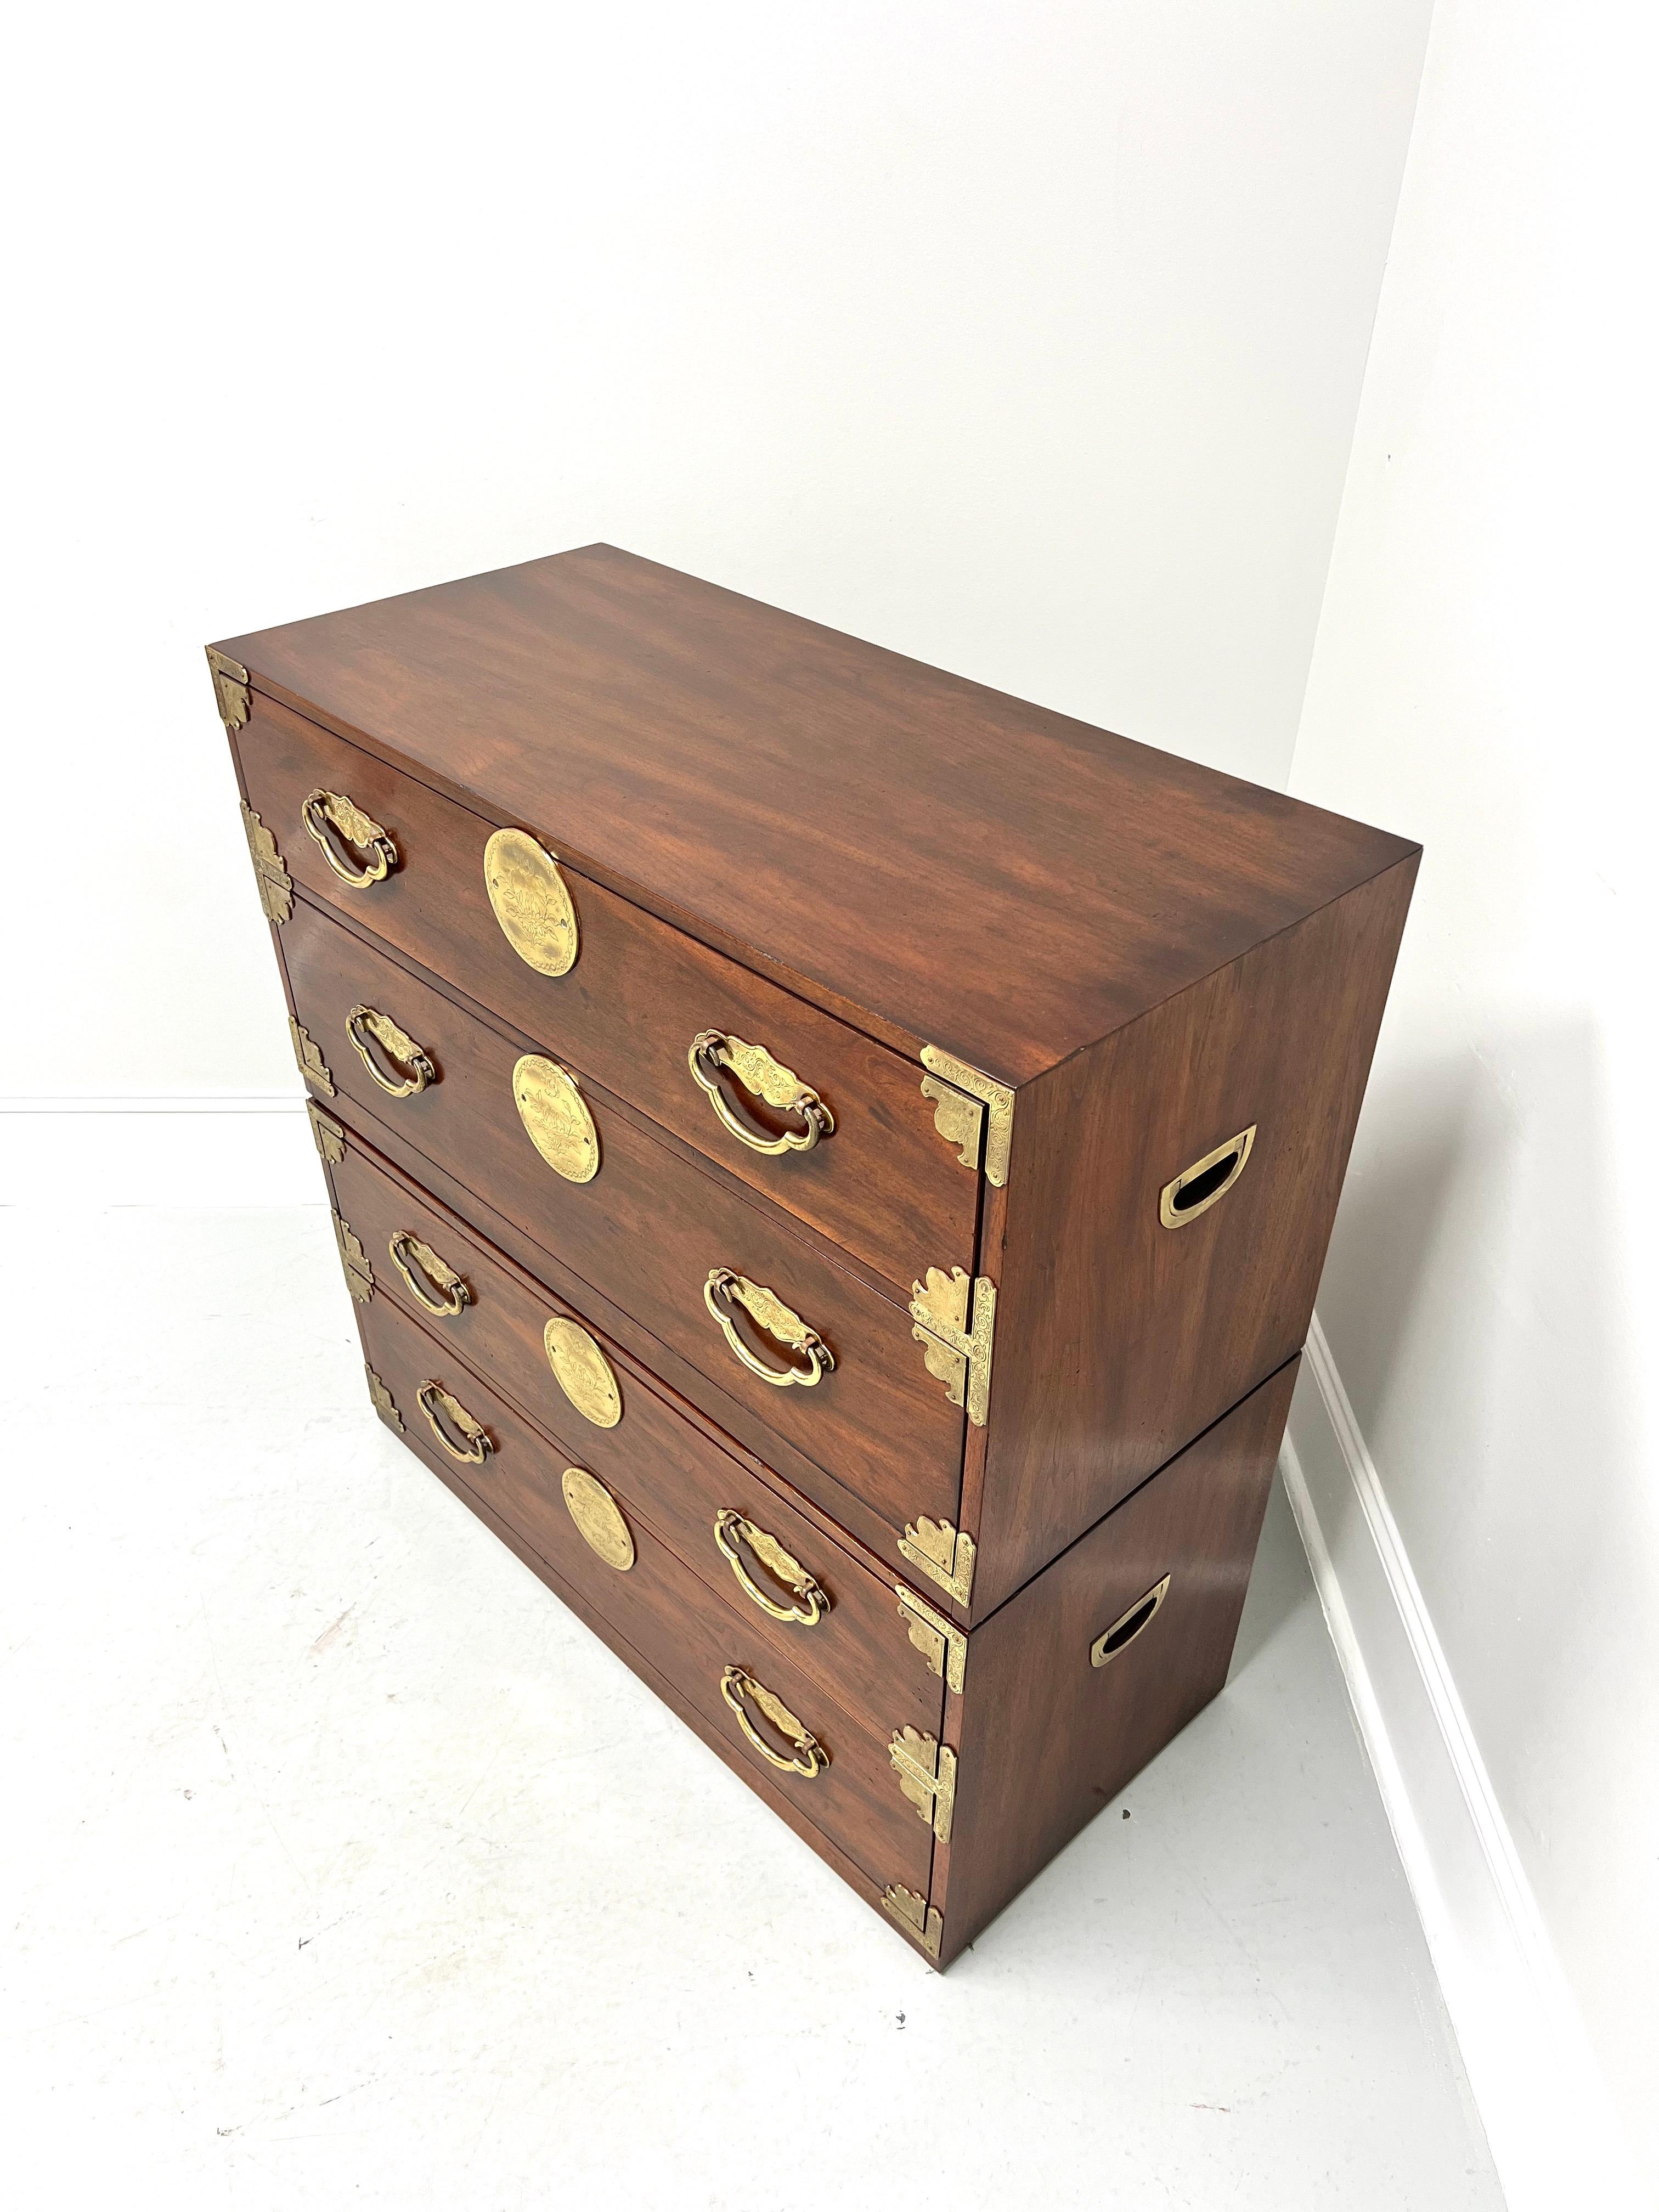 HENREDON Asian Japanese Tansu Campaign Style Modular Stackable Chests - Pair B In Good Condition For Sale In Charlotte, NC